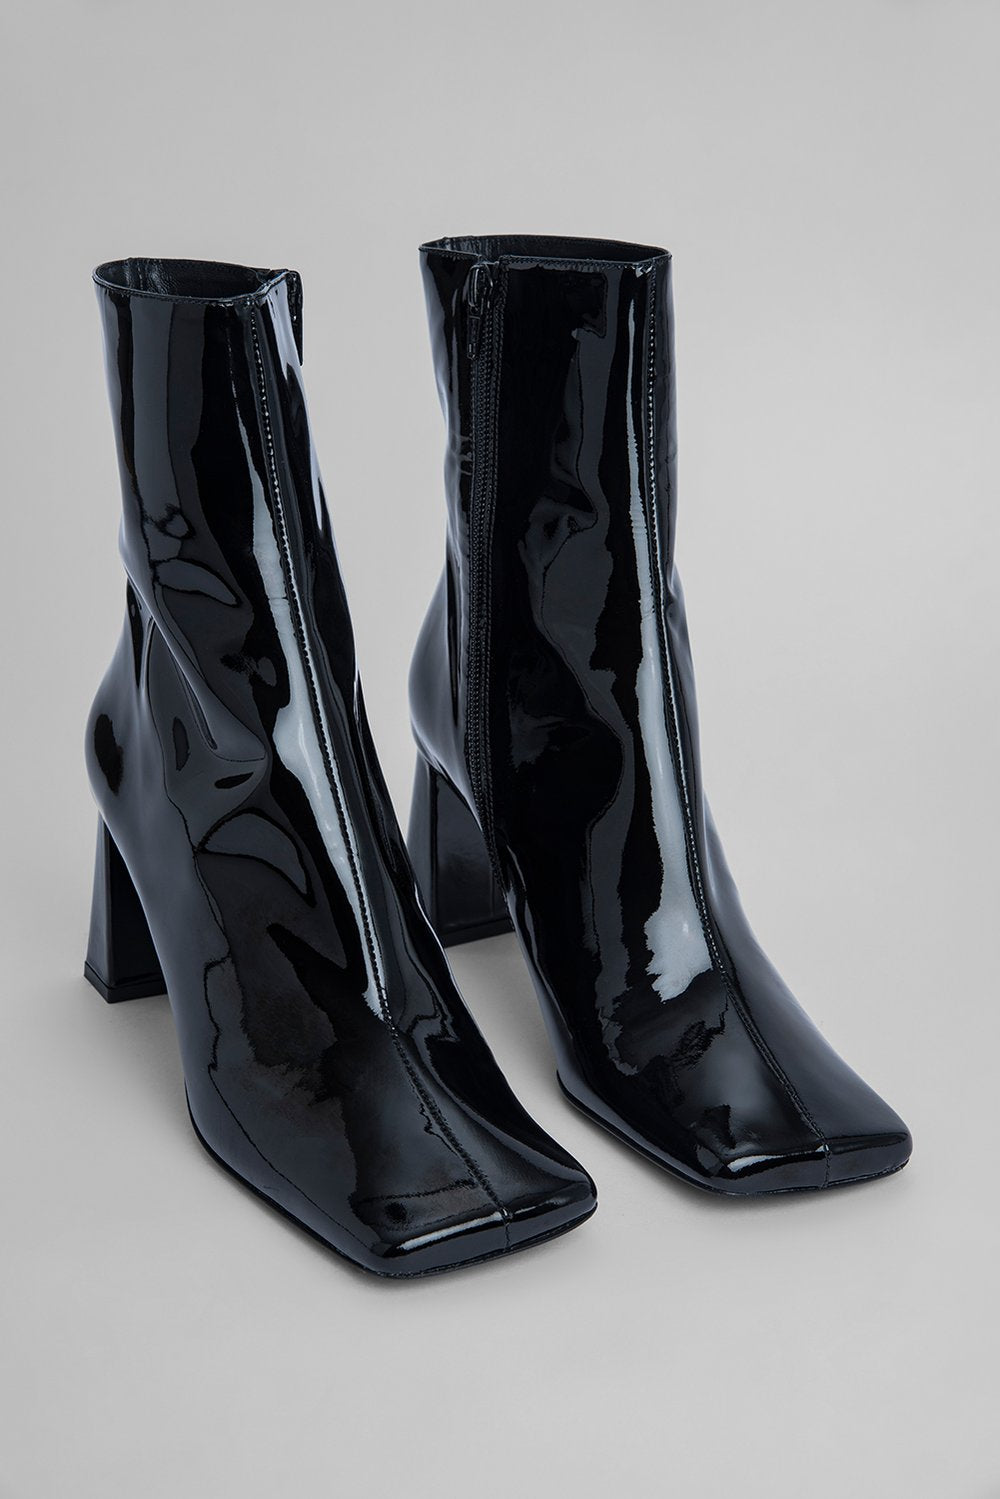 BY FAR CELINE BLACK PATENT LEATHER BOOTS